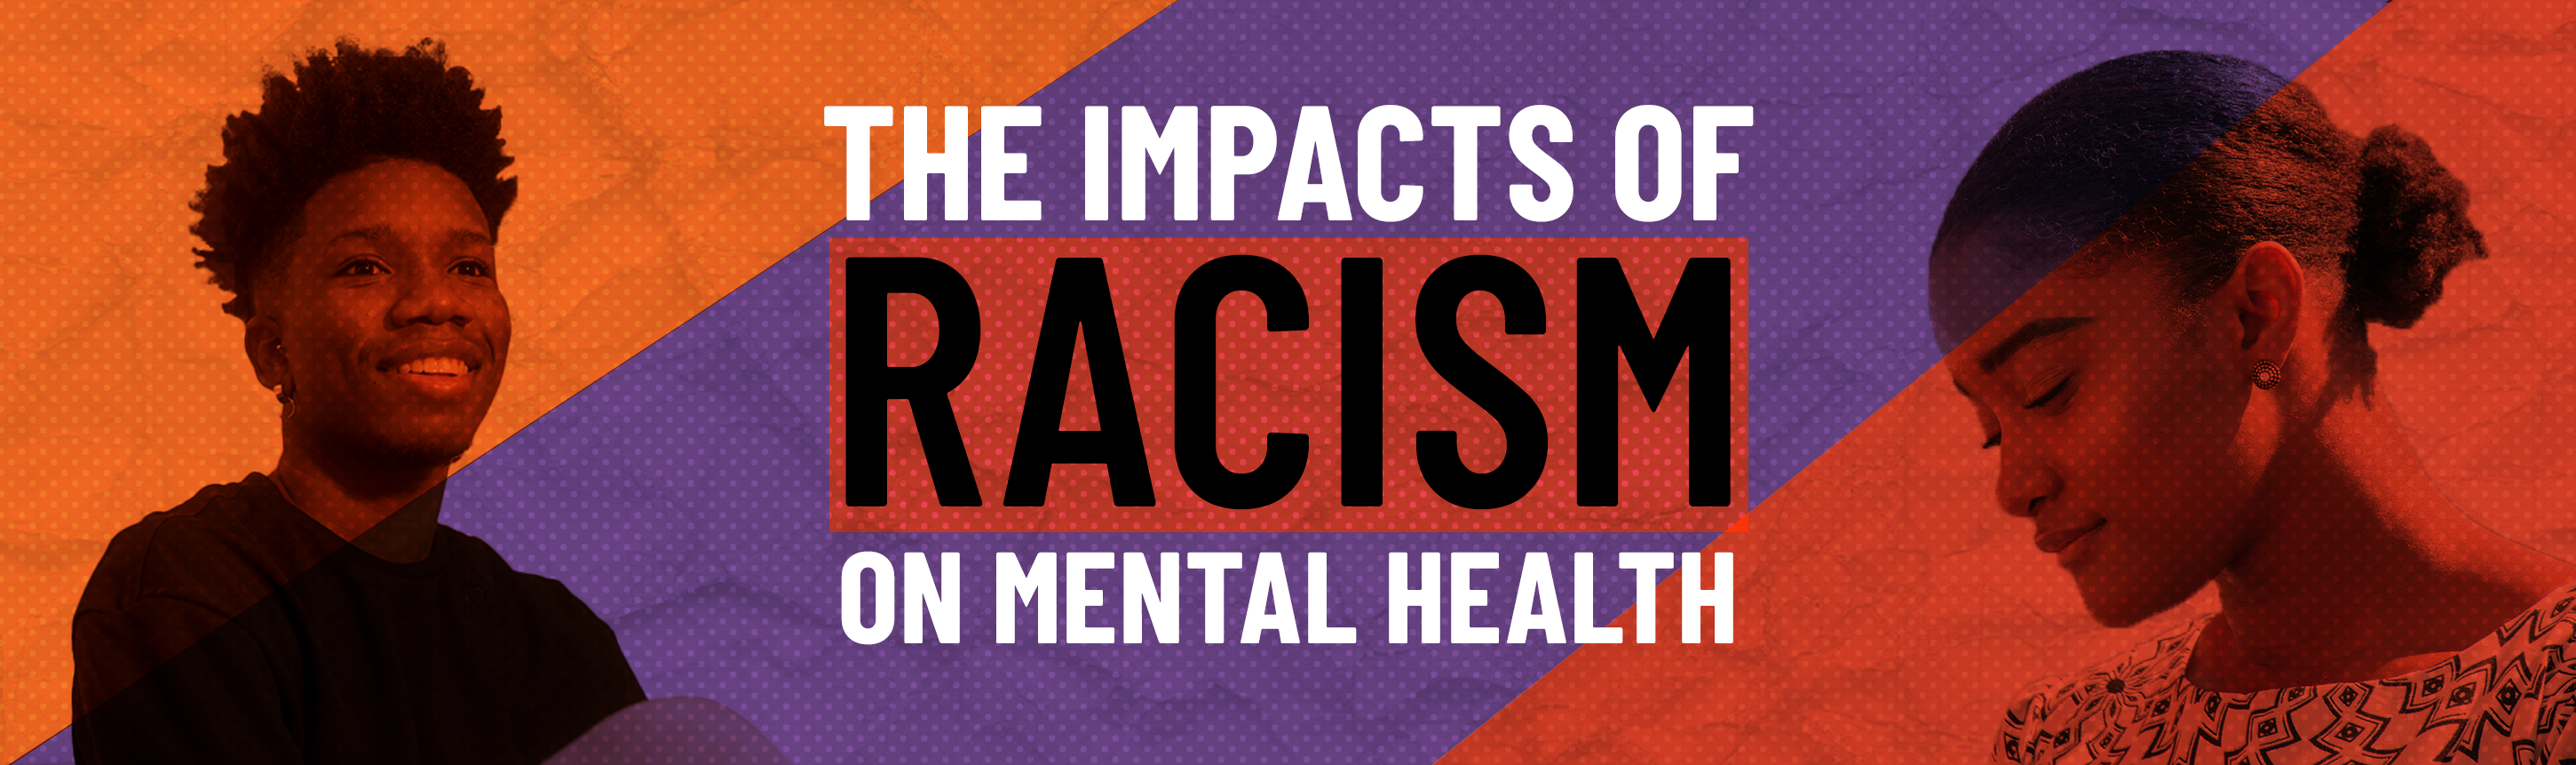 The impacts of racism on mental health